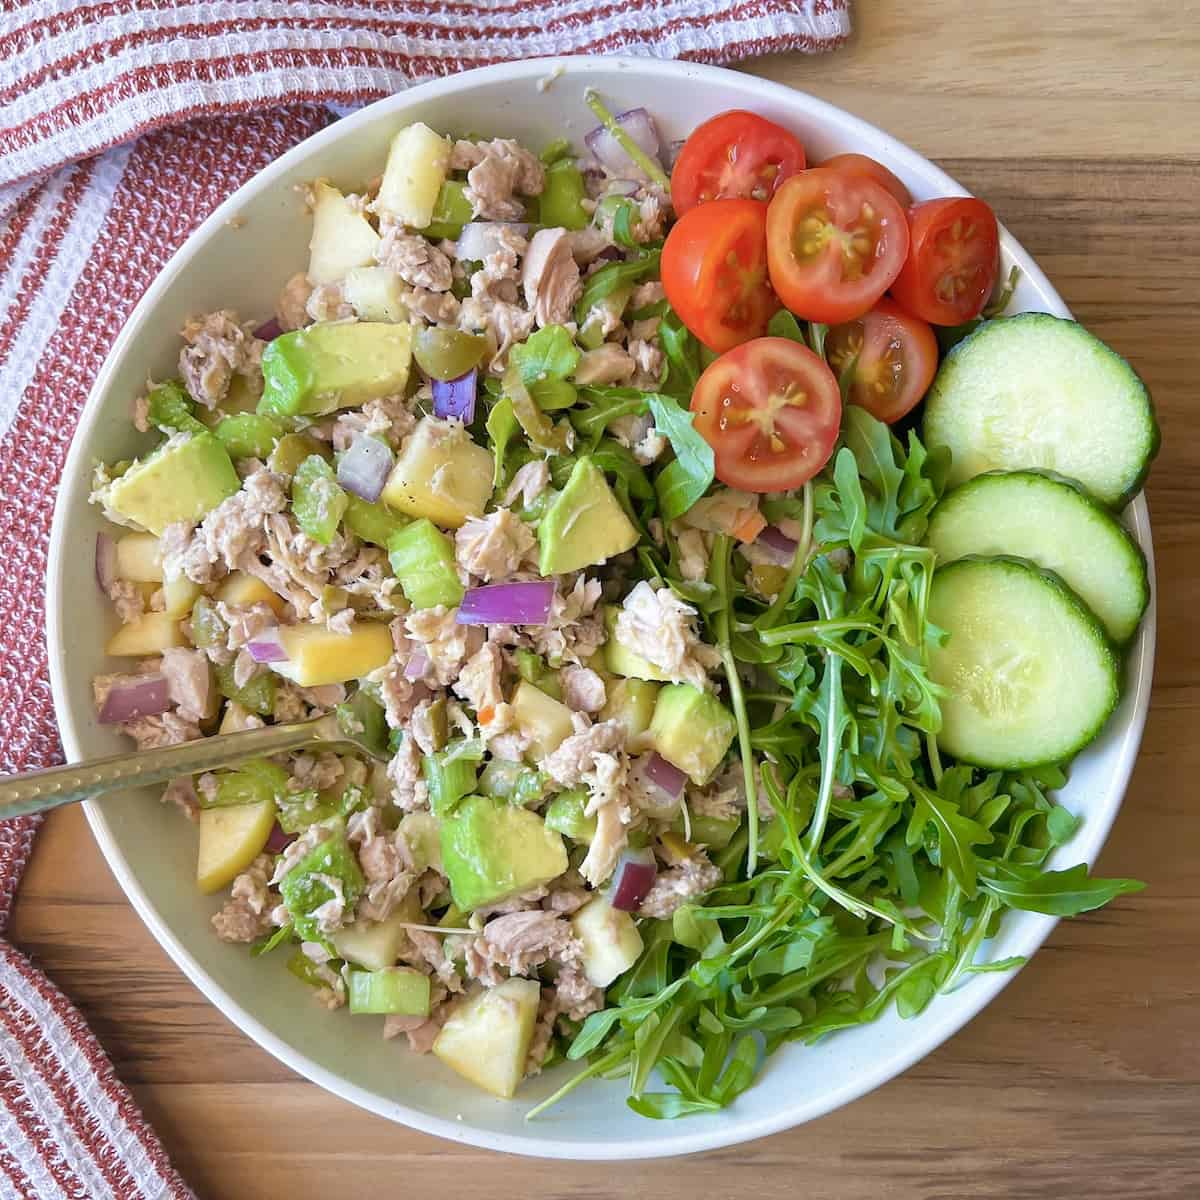 Dairy free tuna salad served on a bed of lettuce